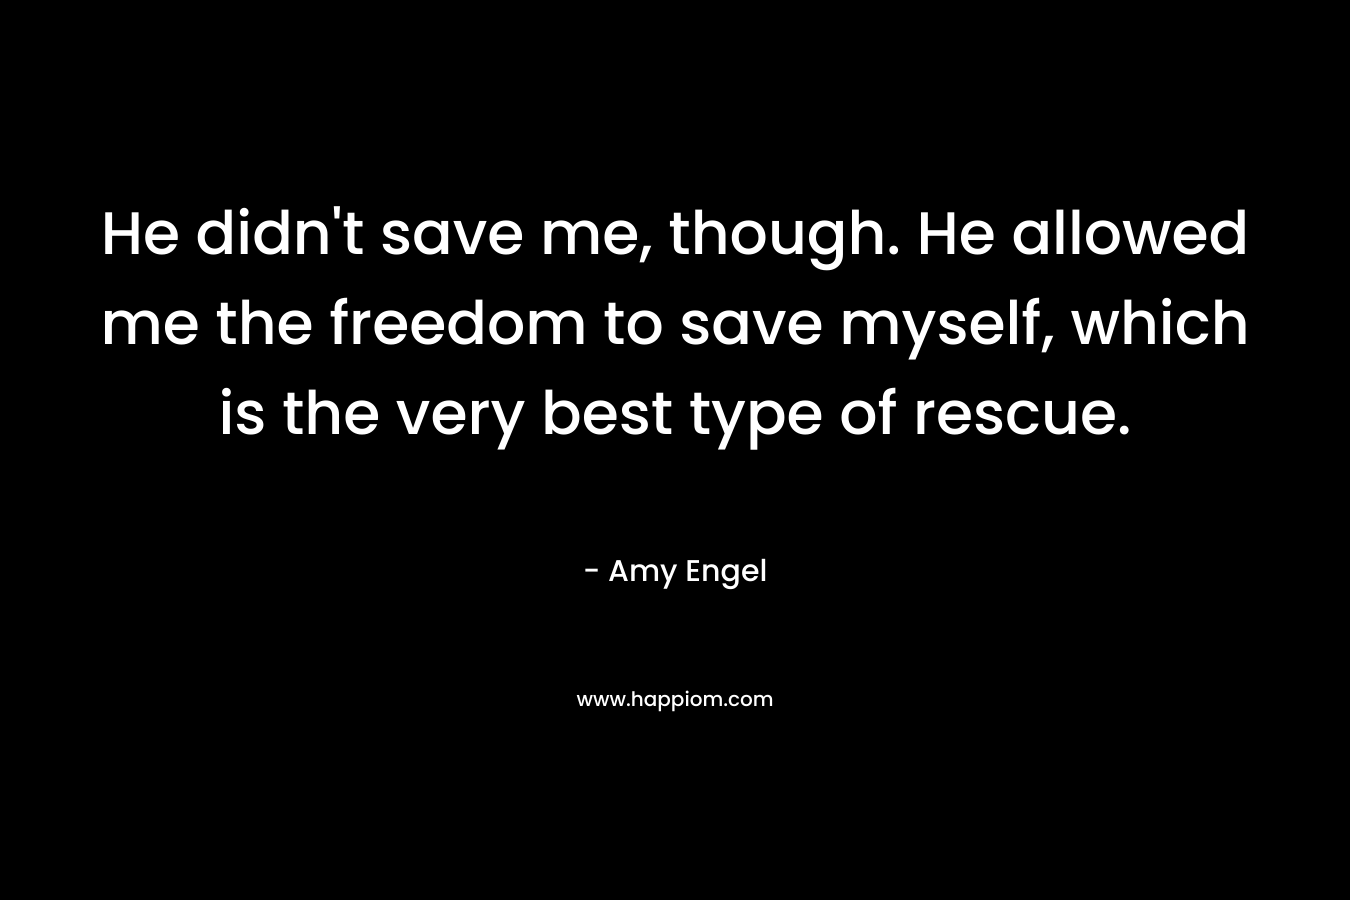 He didn’t save me, though. He allowed me the freedom to save myself, which is the very best type of rescue. – Amy Engel